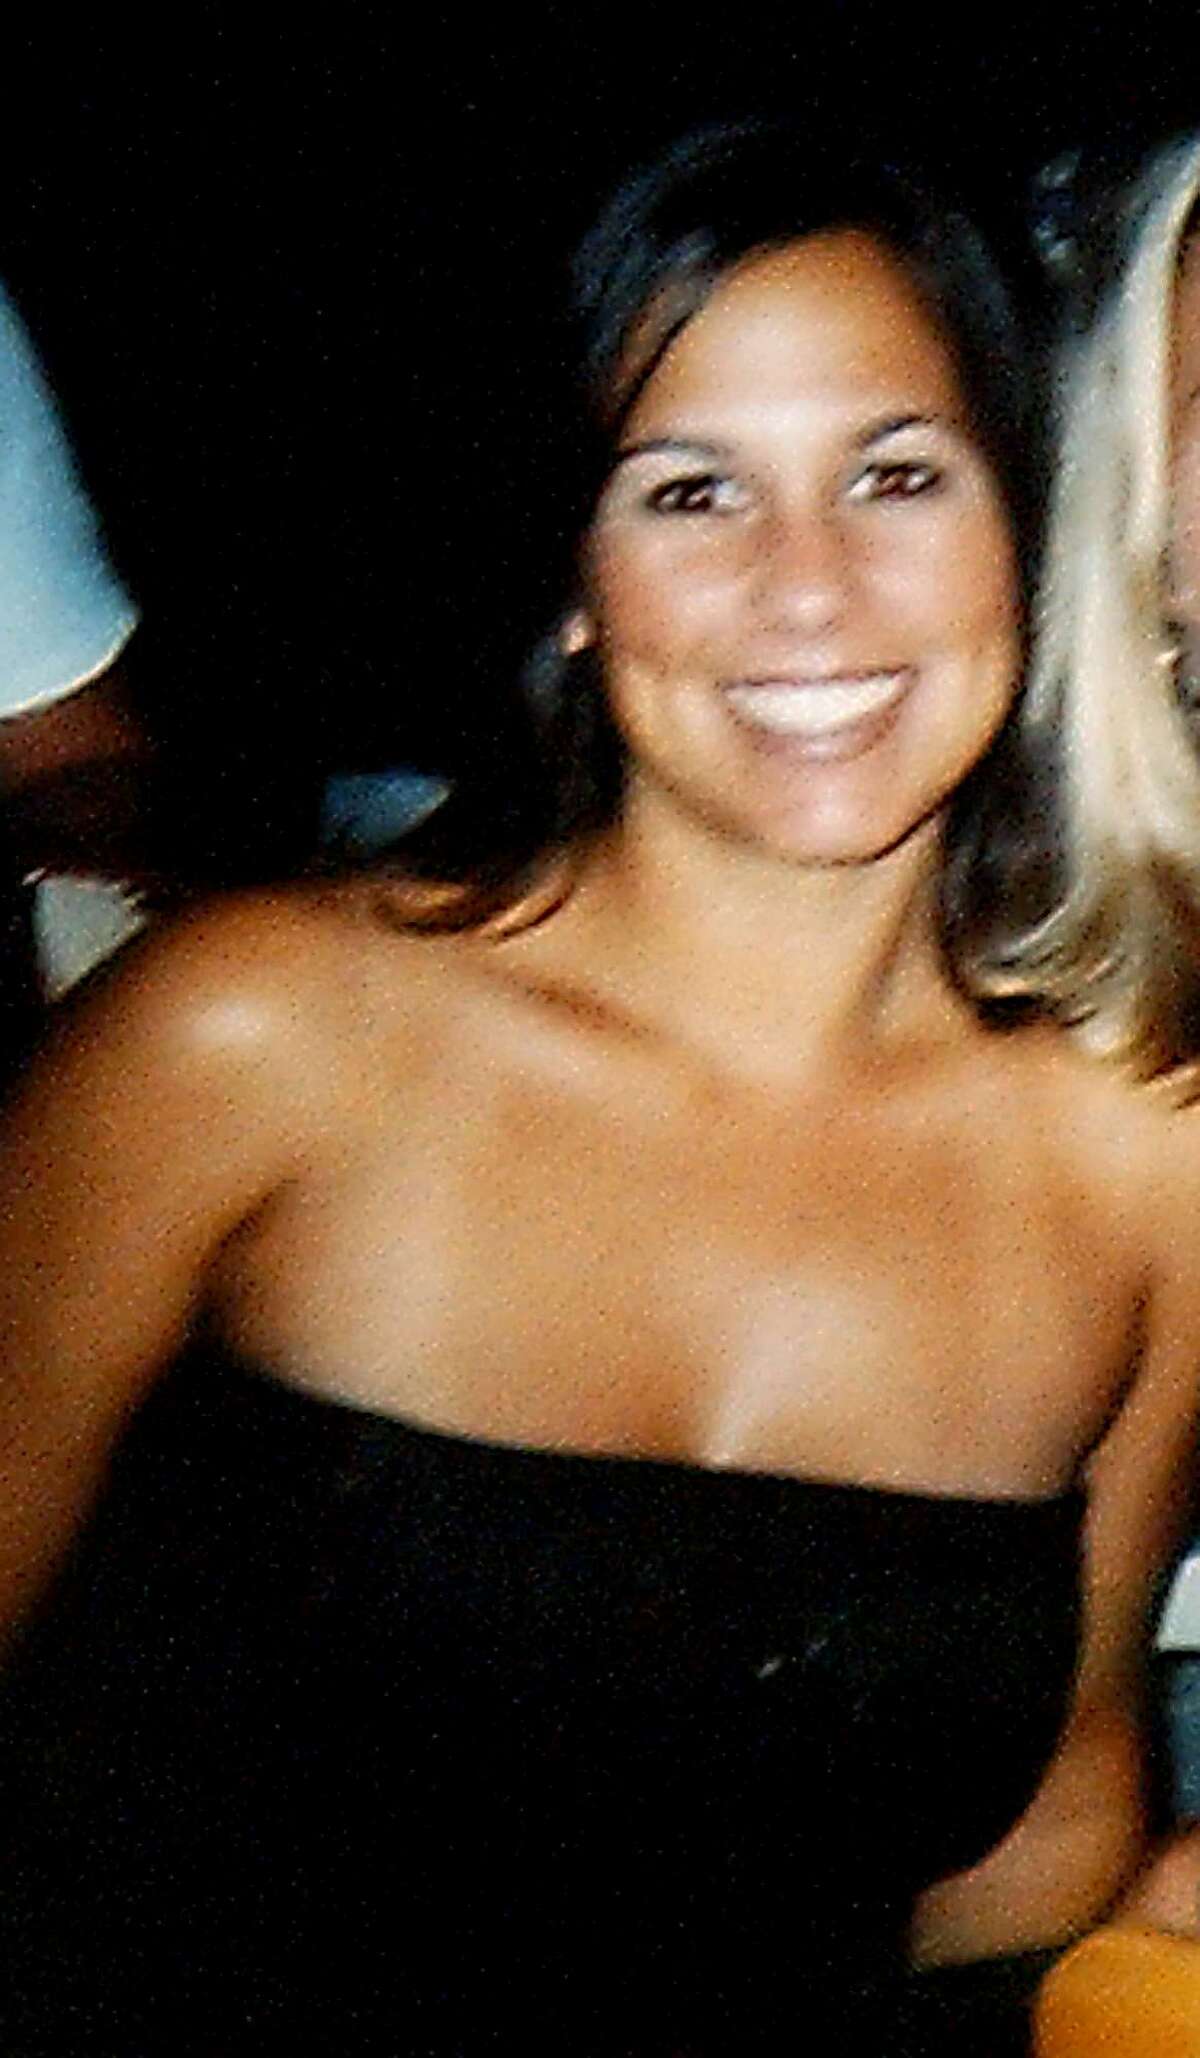 ** FKILE ** Laci Peterson, 27, of Modesto, Calif., is shown in this July 2002 family photo.A jury decided Monday Dec. 13, 2004 that Scott Peterson should be executed for murdering his pregnant wife, Laci, whose Christmas Eve disappearance two years ago was the opening act in a legal drama that captivated the nation. (AP Photo/Peterson Family) Ran on: 12-14-2004 Scott Peterson Ran on: 12-15-2004 A note at the burial site of Laci and Conner Peterson near Escalon (San Joaquin County) memorializes the slaying victims. Ran on: 12-15-2004 A note at the burial site of slaying victims Laci and Conner Peterson near Escalon (San Joaquin County) mentions the verdict. Ran on: 03-17-2005 Lee Peterson (left) and Jackie Peterson, parents of Scott Peterson, leave the courthouse where their son was sentenced to death. Ran on: 03-17-2005 Lee Peterson (left) and Jackie Peterson, parents of Scott Peterson, leave the courthouse where their son was sentenced to death. Also Ran on: 06-24-2007 Laci Peterson ALSO Ran on: 11-02-2007 Scott Peterson Ran on: 11-02-2007 Scott Peterson Ran on: 11-02-2007